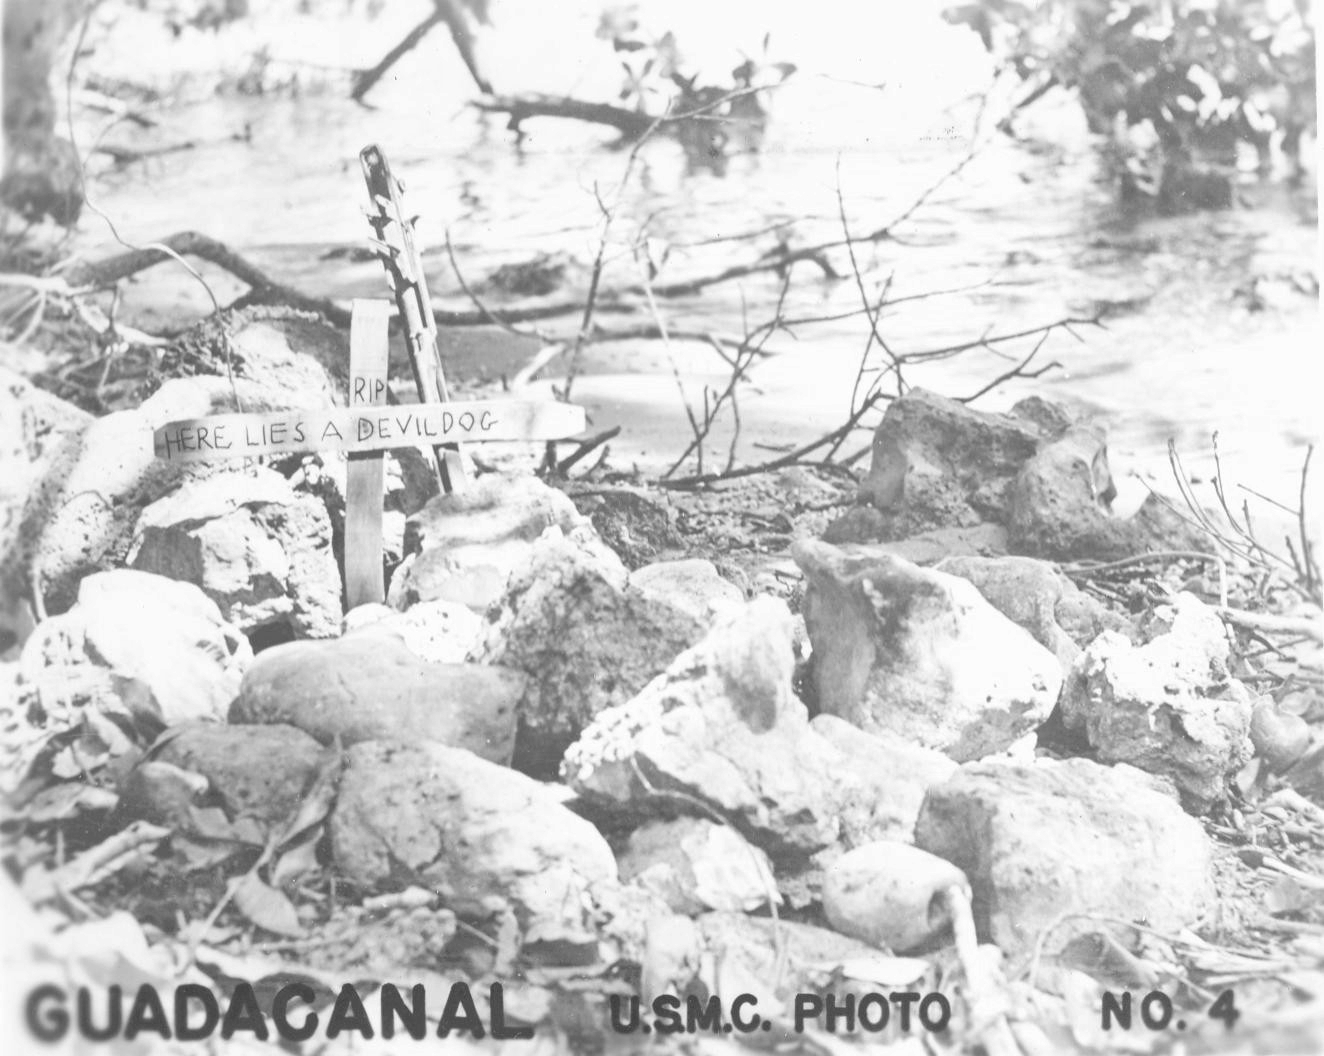 Temporary grave of a fallen US Marine, Lunga Point, Guadalcanal, Oct-Nov 1942